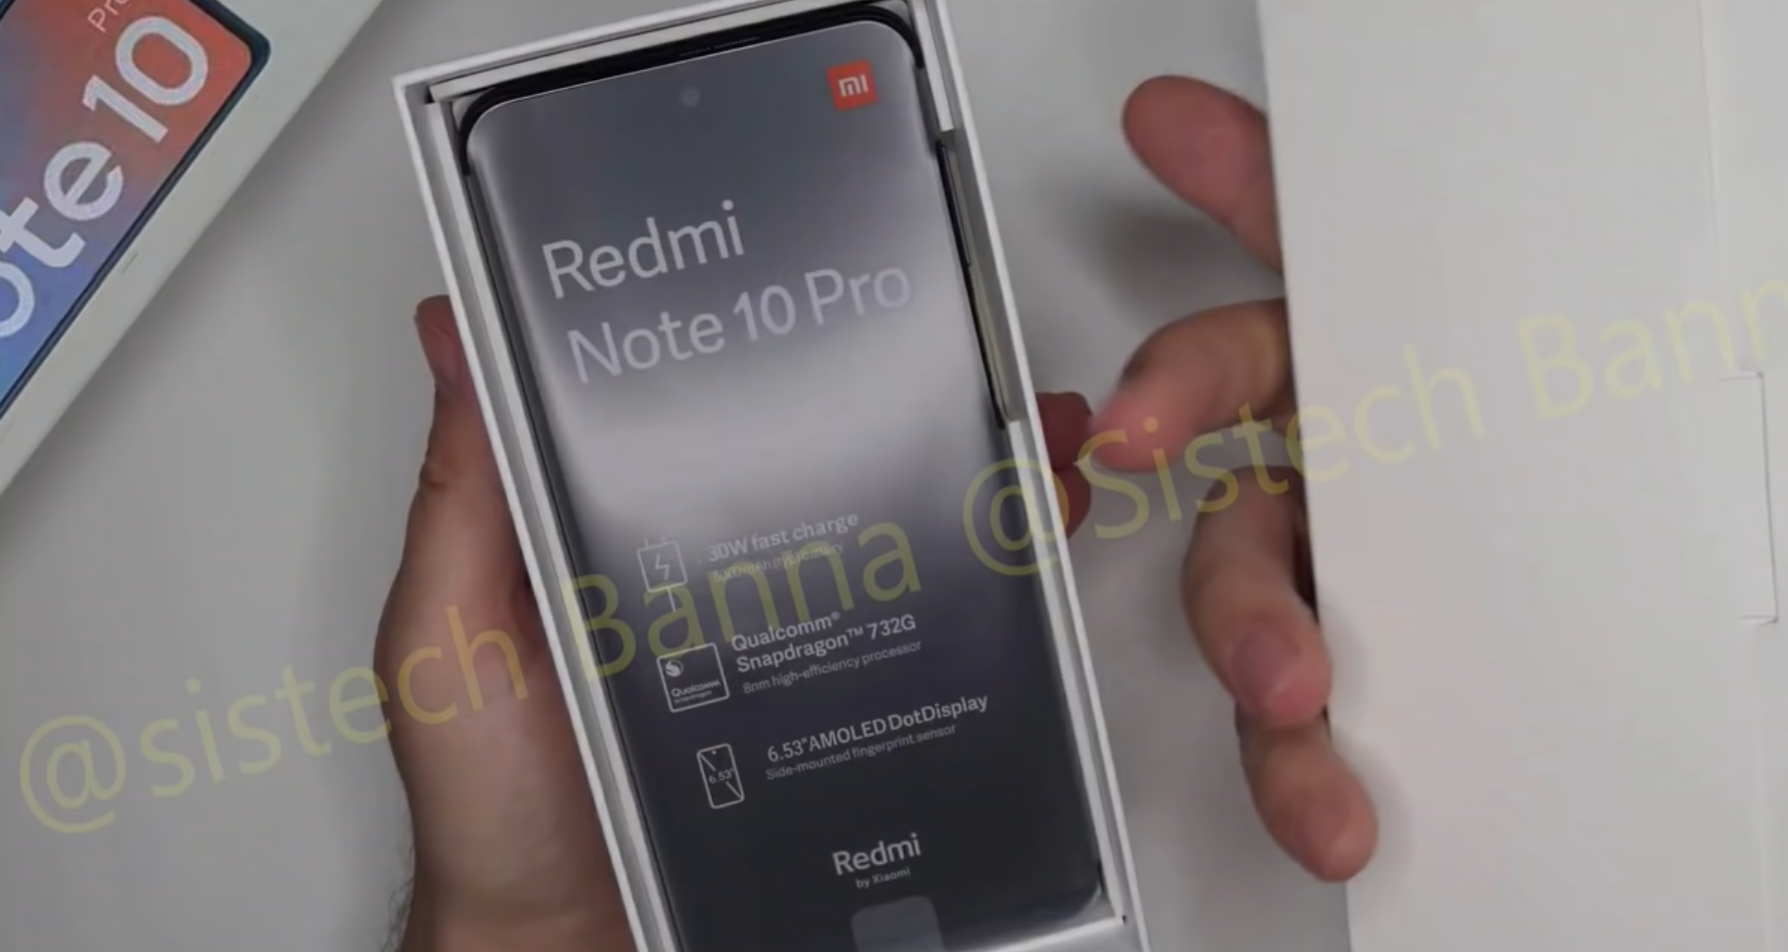 Redmi Note 10 Pro key specifications appear through retail box 